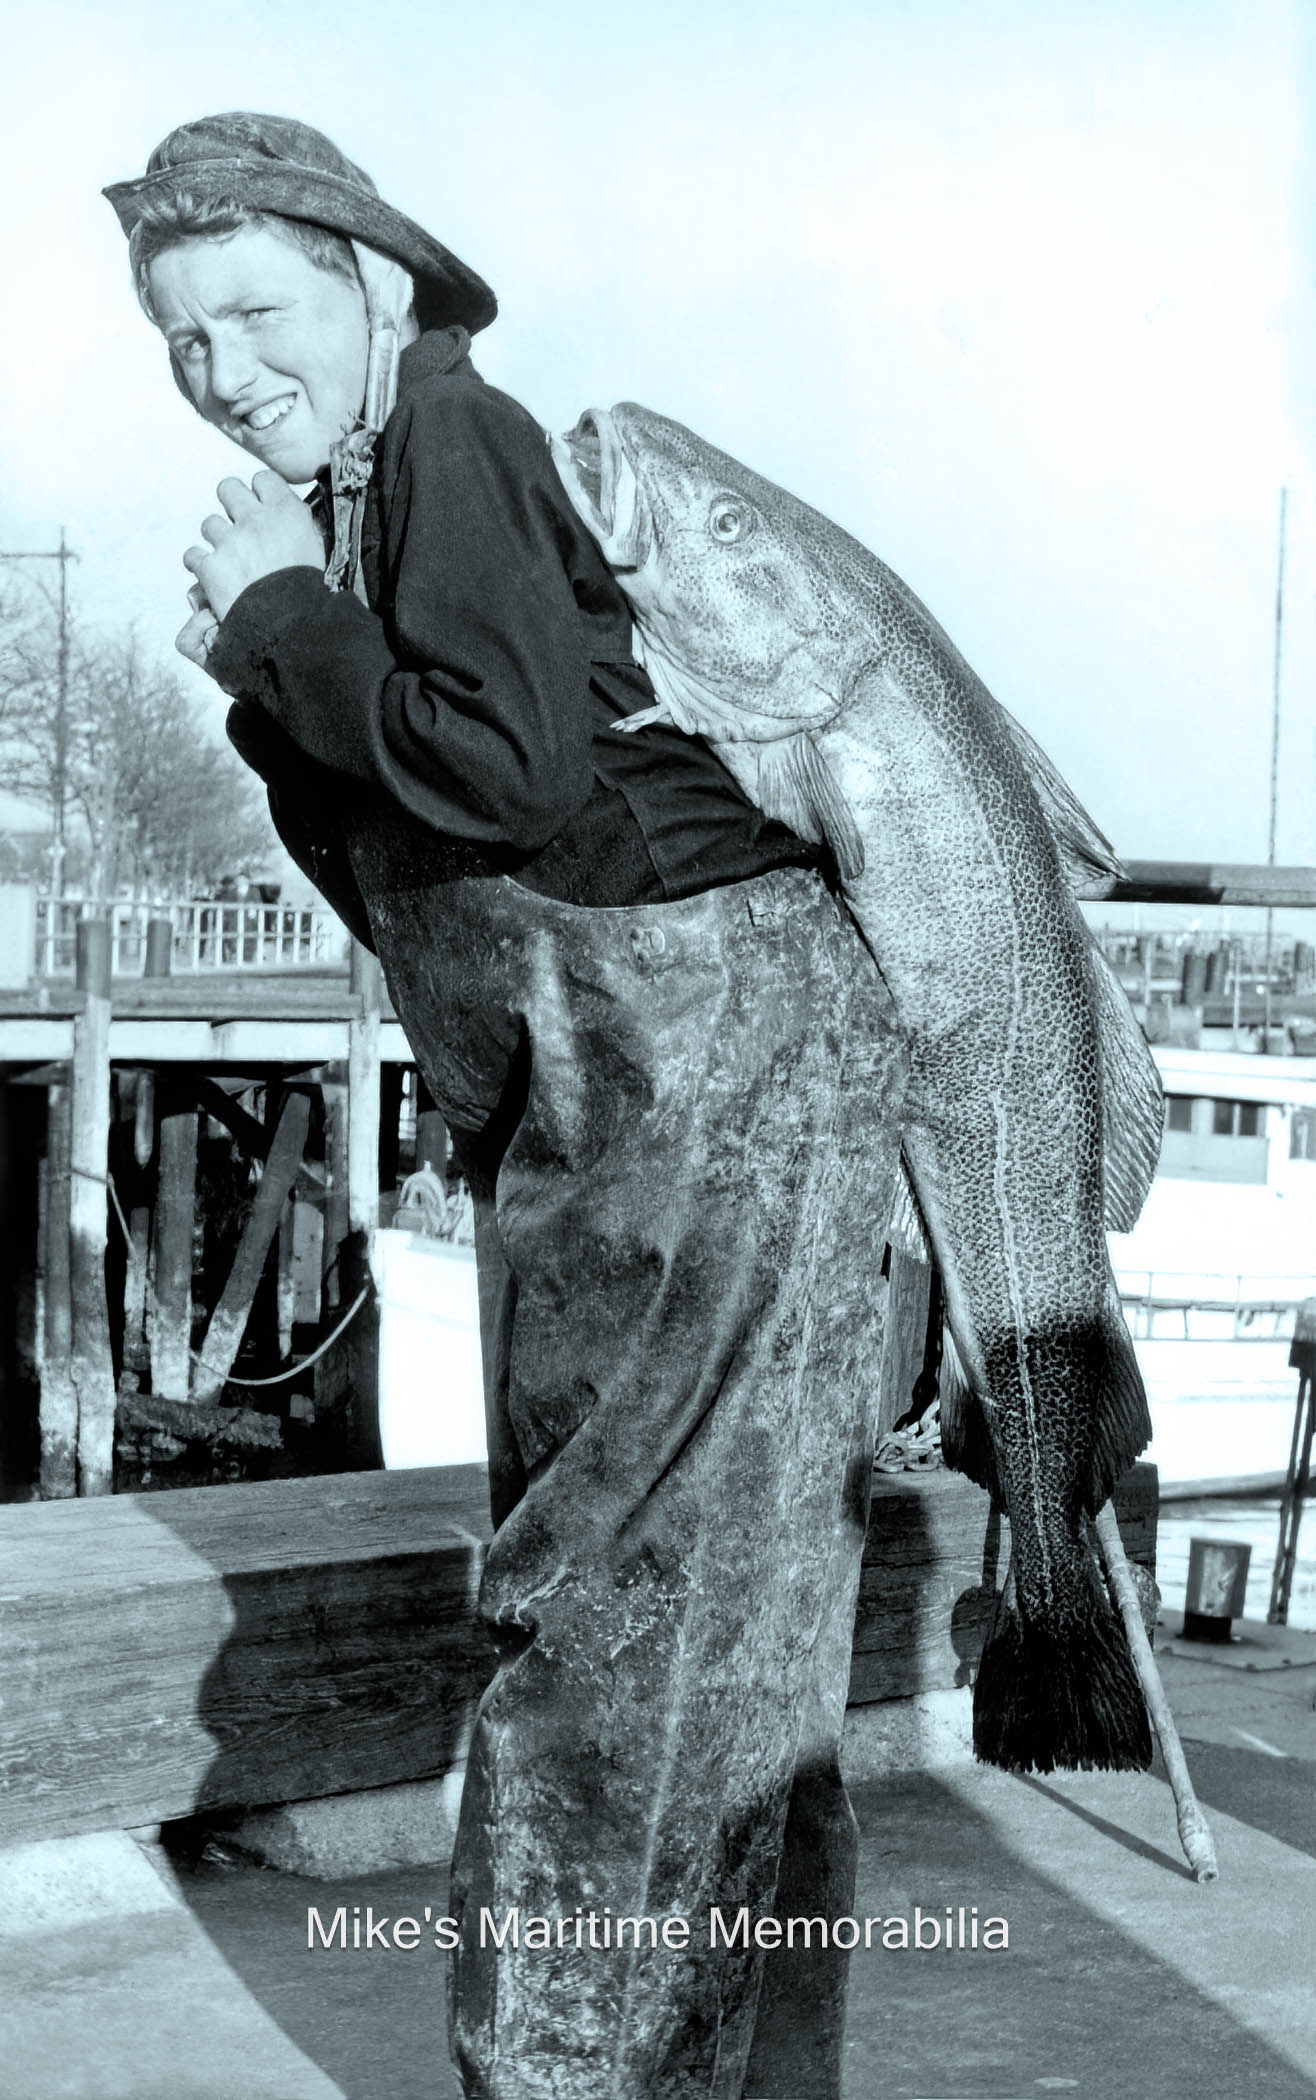 Sheepshead Bay Cod Catch – 1955 Heigh-ho, heigh-ho. Its home from work we go! Instead of swinging a sea bag over his shoulder, this Sheepshead Bay, NY party boat mate is lugging home a nice Cod for dinner circa 1955.